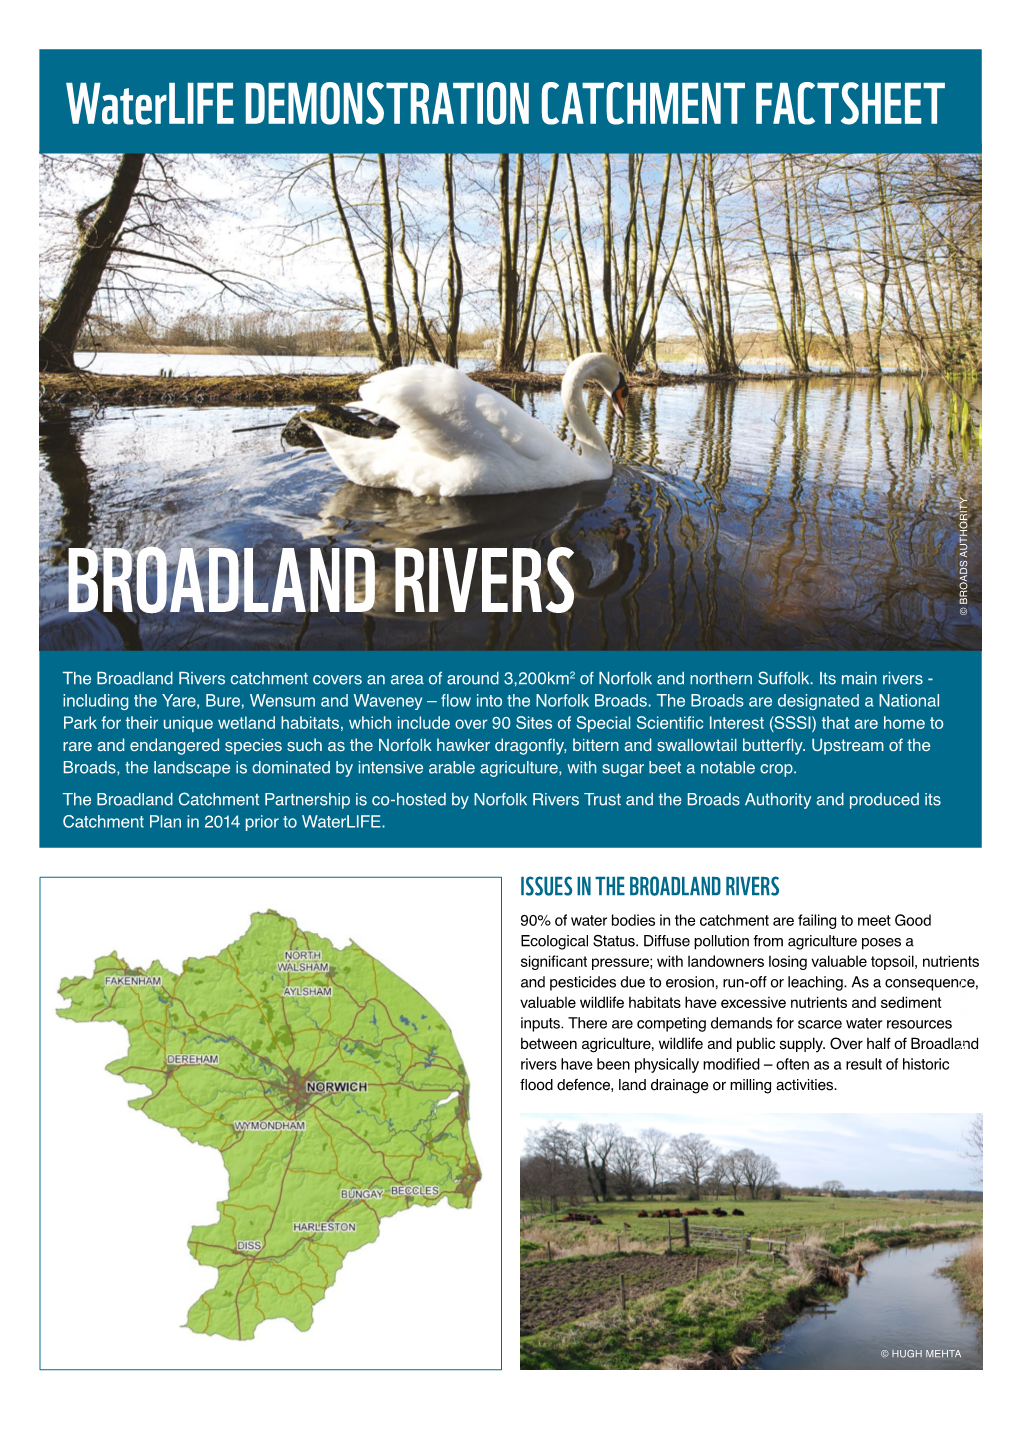 Broadland Rivers Catchment Covers an Area of Around 3,200Km Area of an Around Covers Catchment Rivers Broadland the Catchment Plan 2014 in Catchment to Waterlife